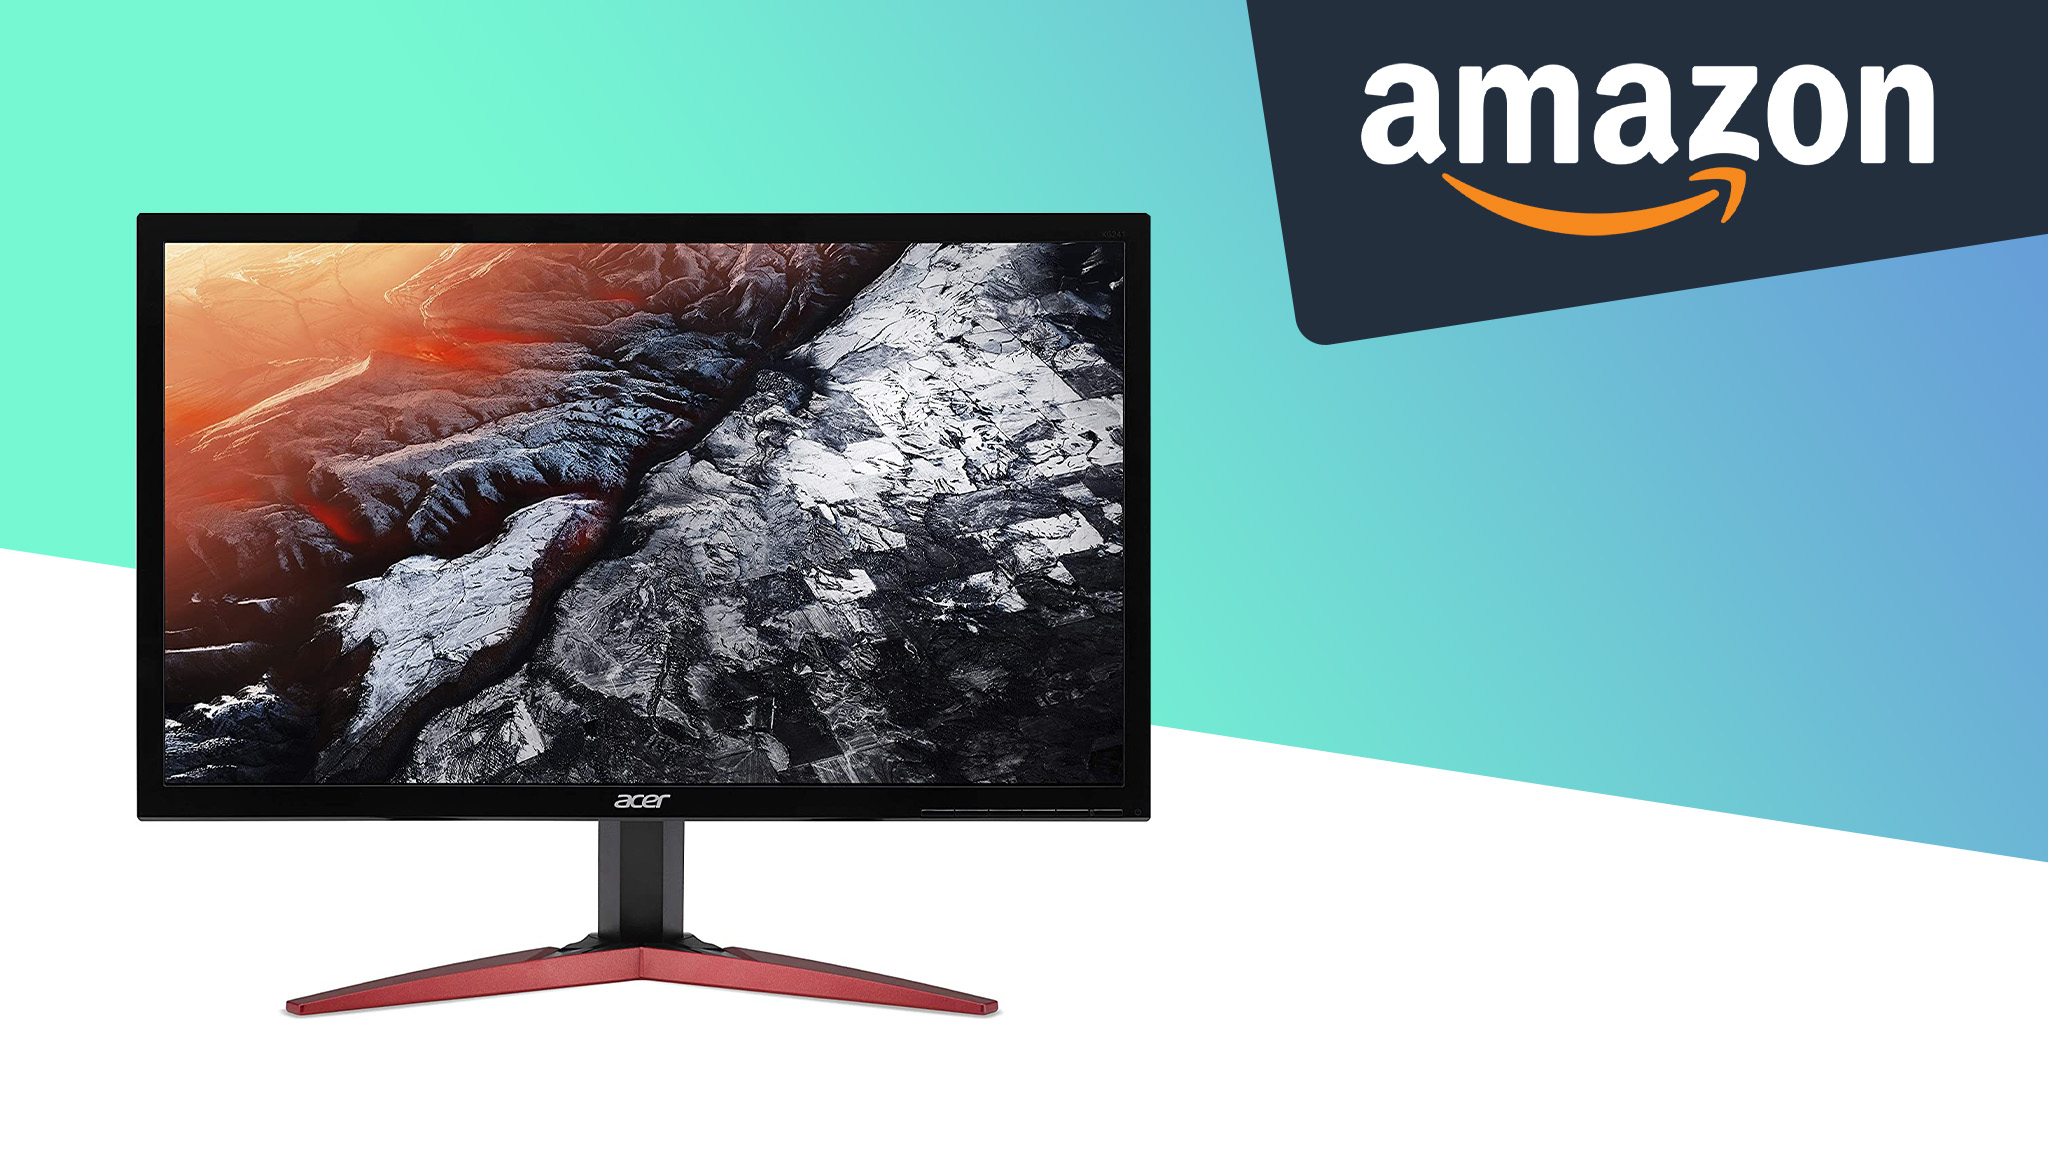 Gaming Monitor: Acer KG241S Cheaper on Amazon